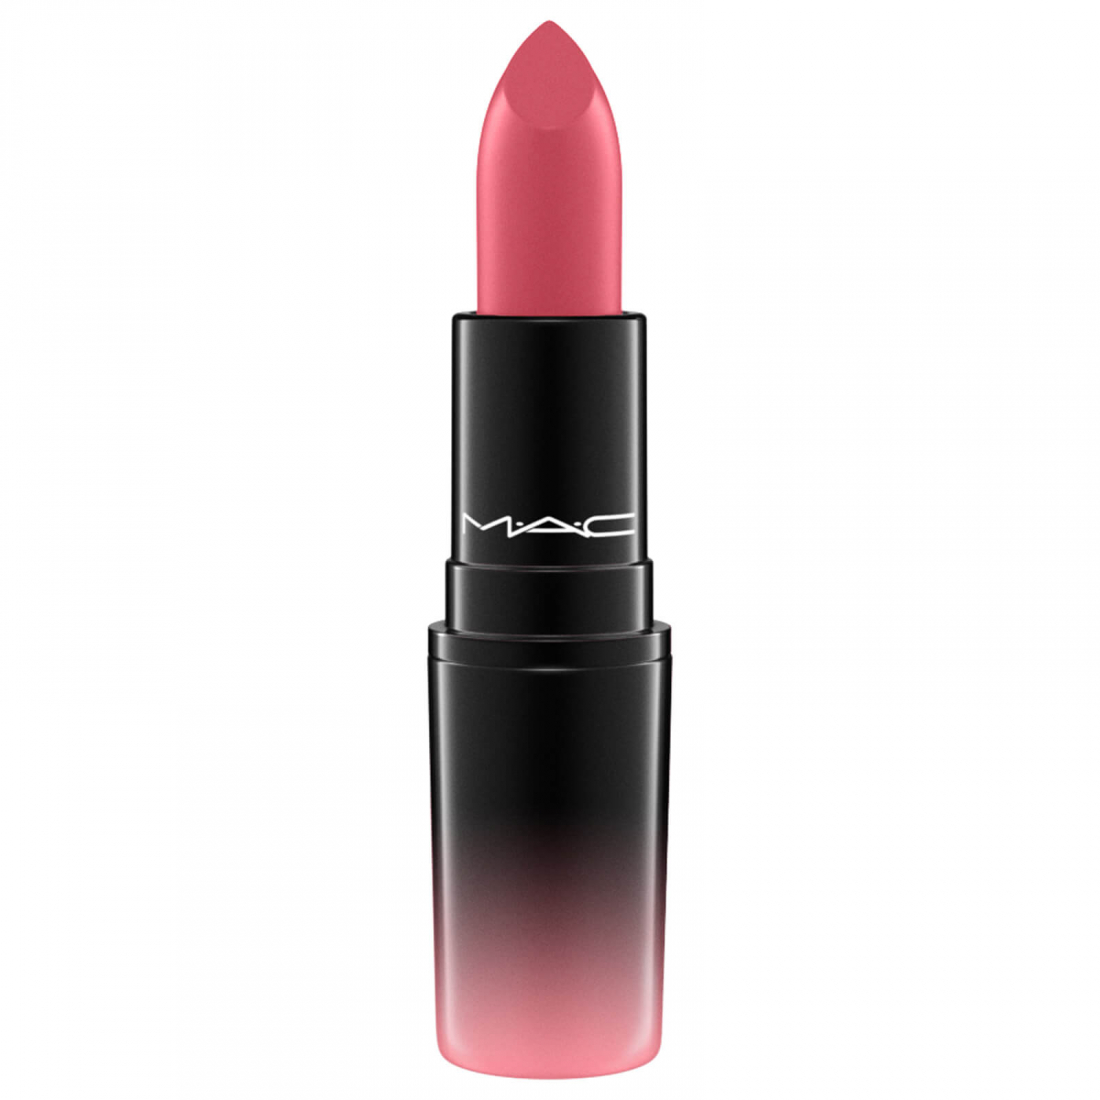 'Love Me' Lipstick - 407 As If I Care 3 g